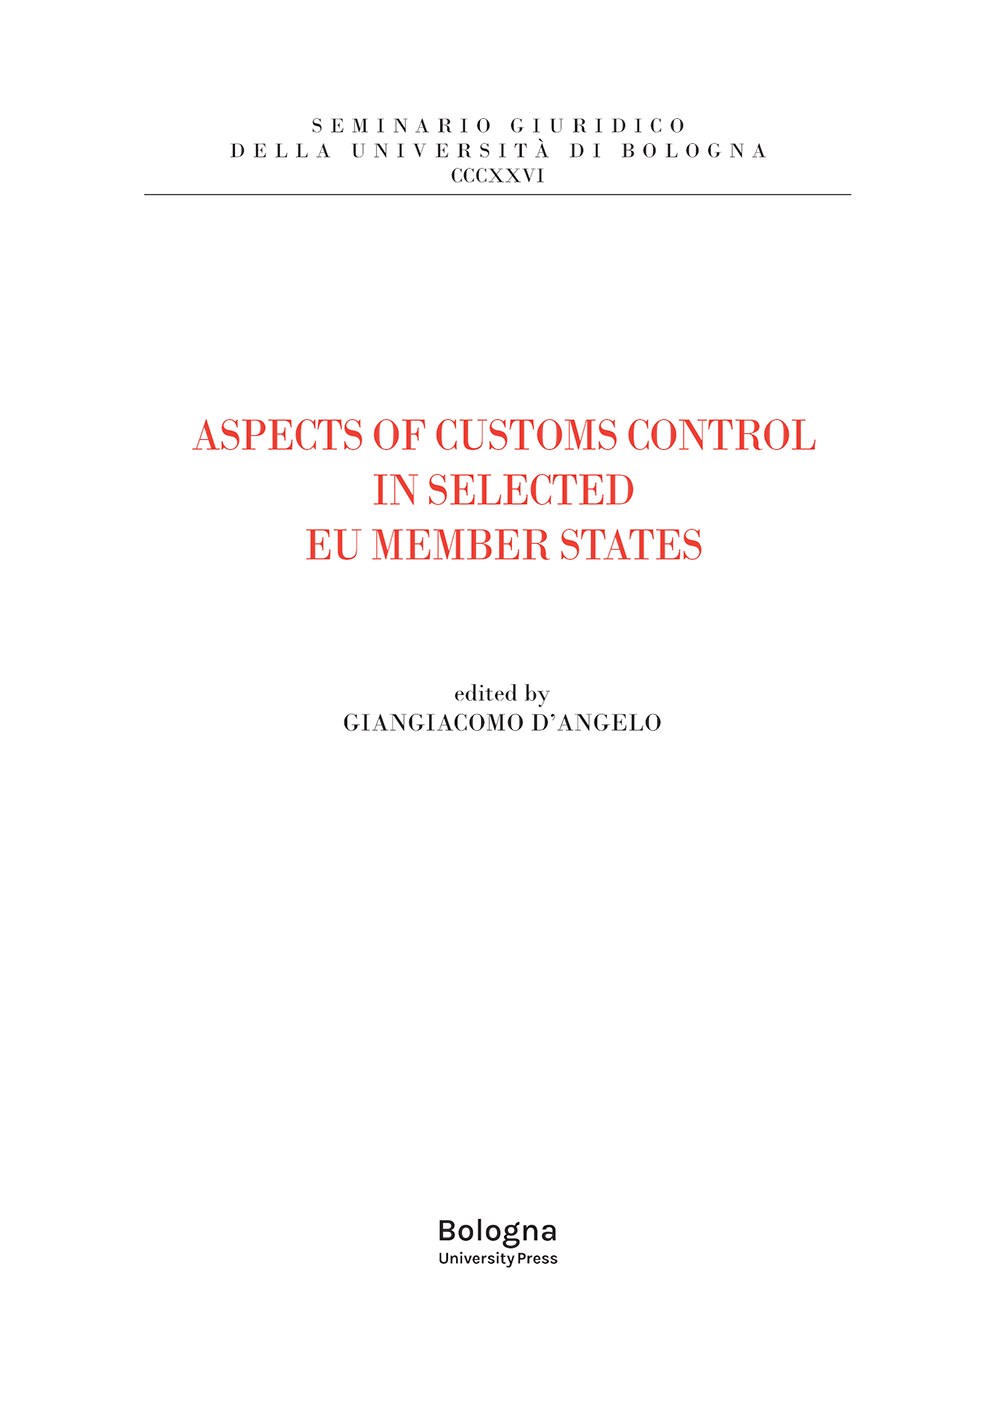 ASPECTS OF CUSTOMS CONTROL IN SELECTED EU MEMBER STATES - Bologna University Press